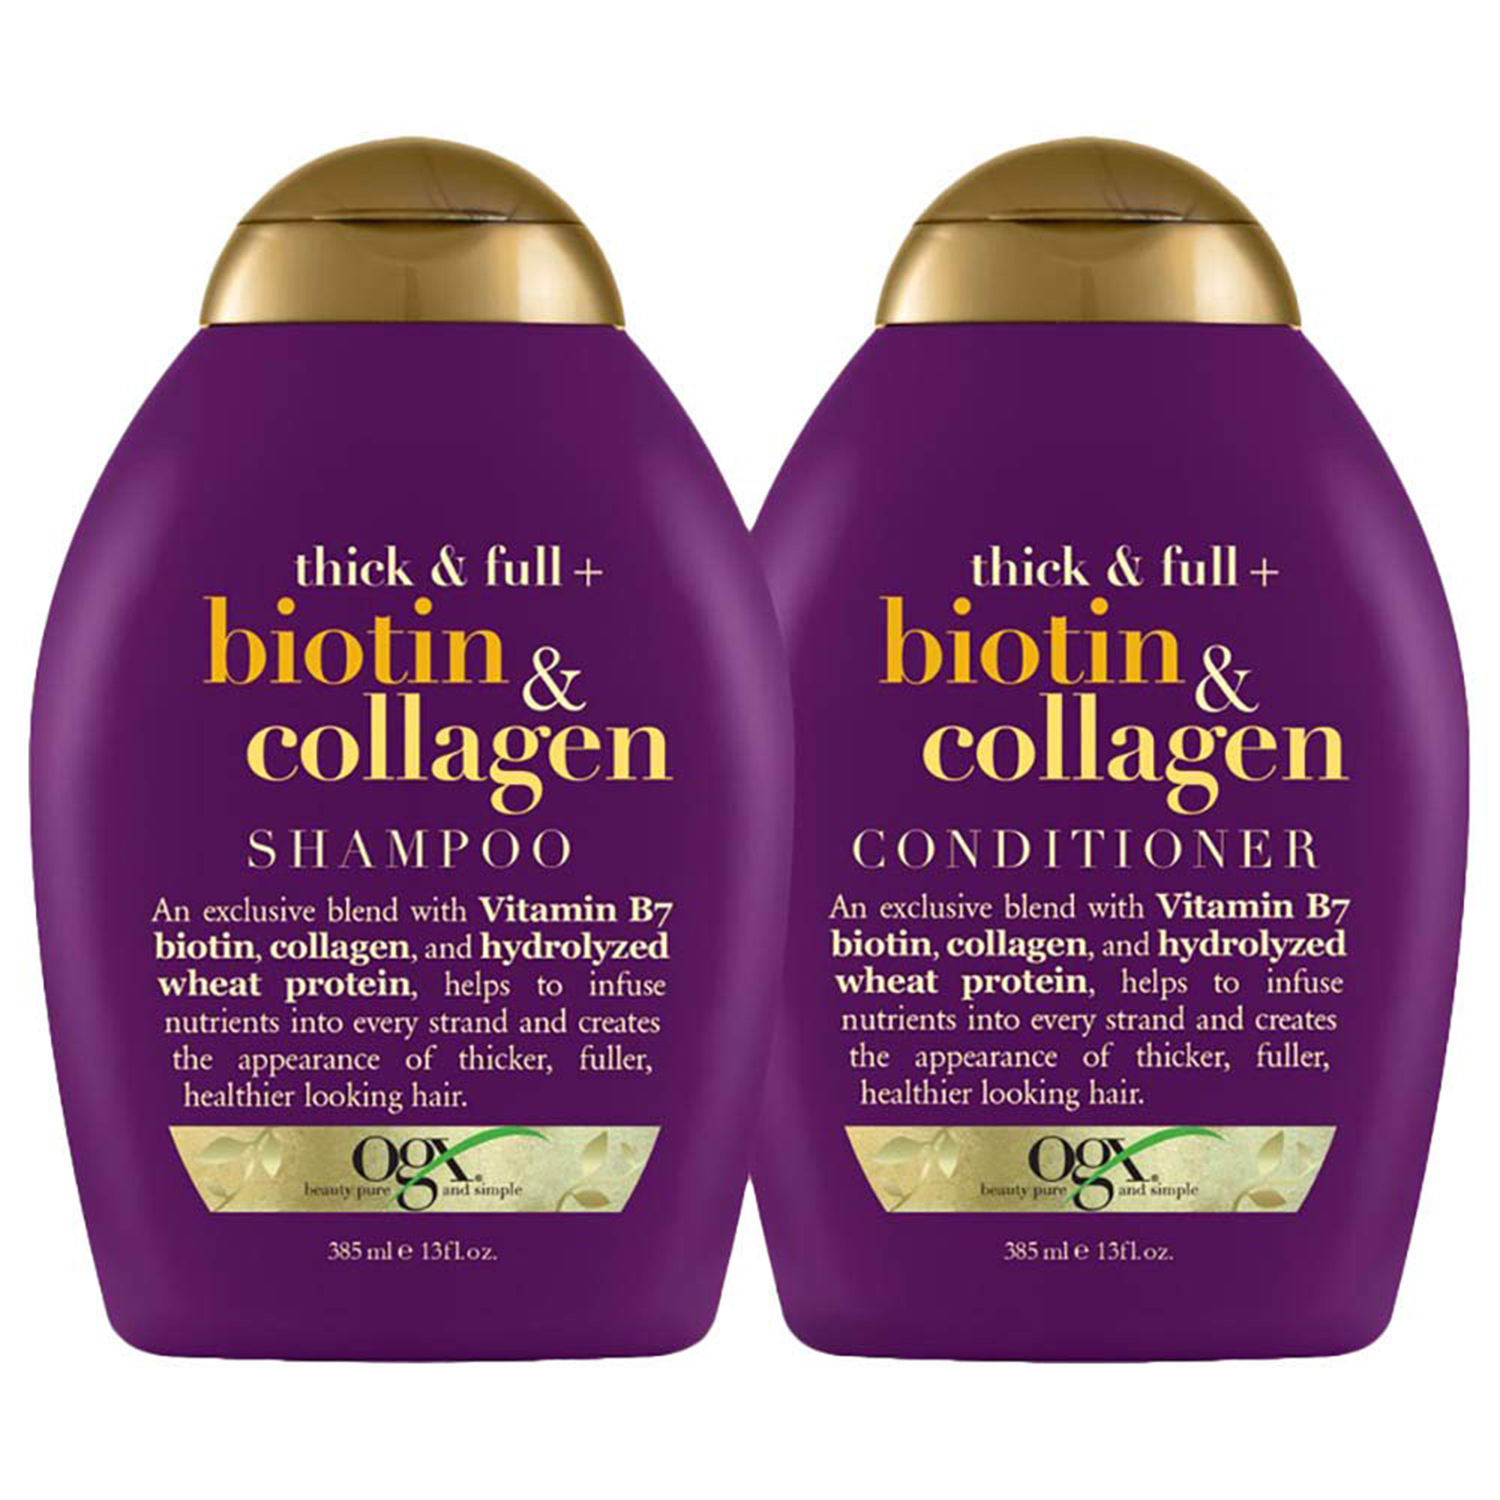 OGX Thick & Full Biotin & Collagen Shampoo (and Conditioner)